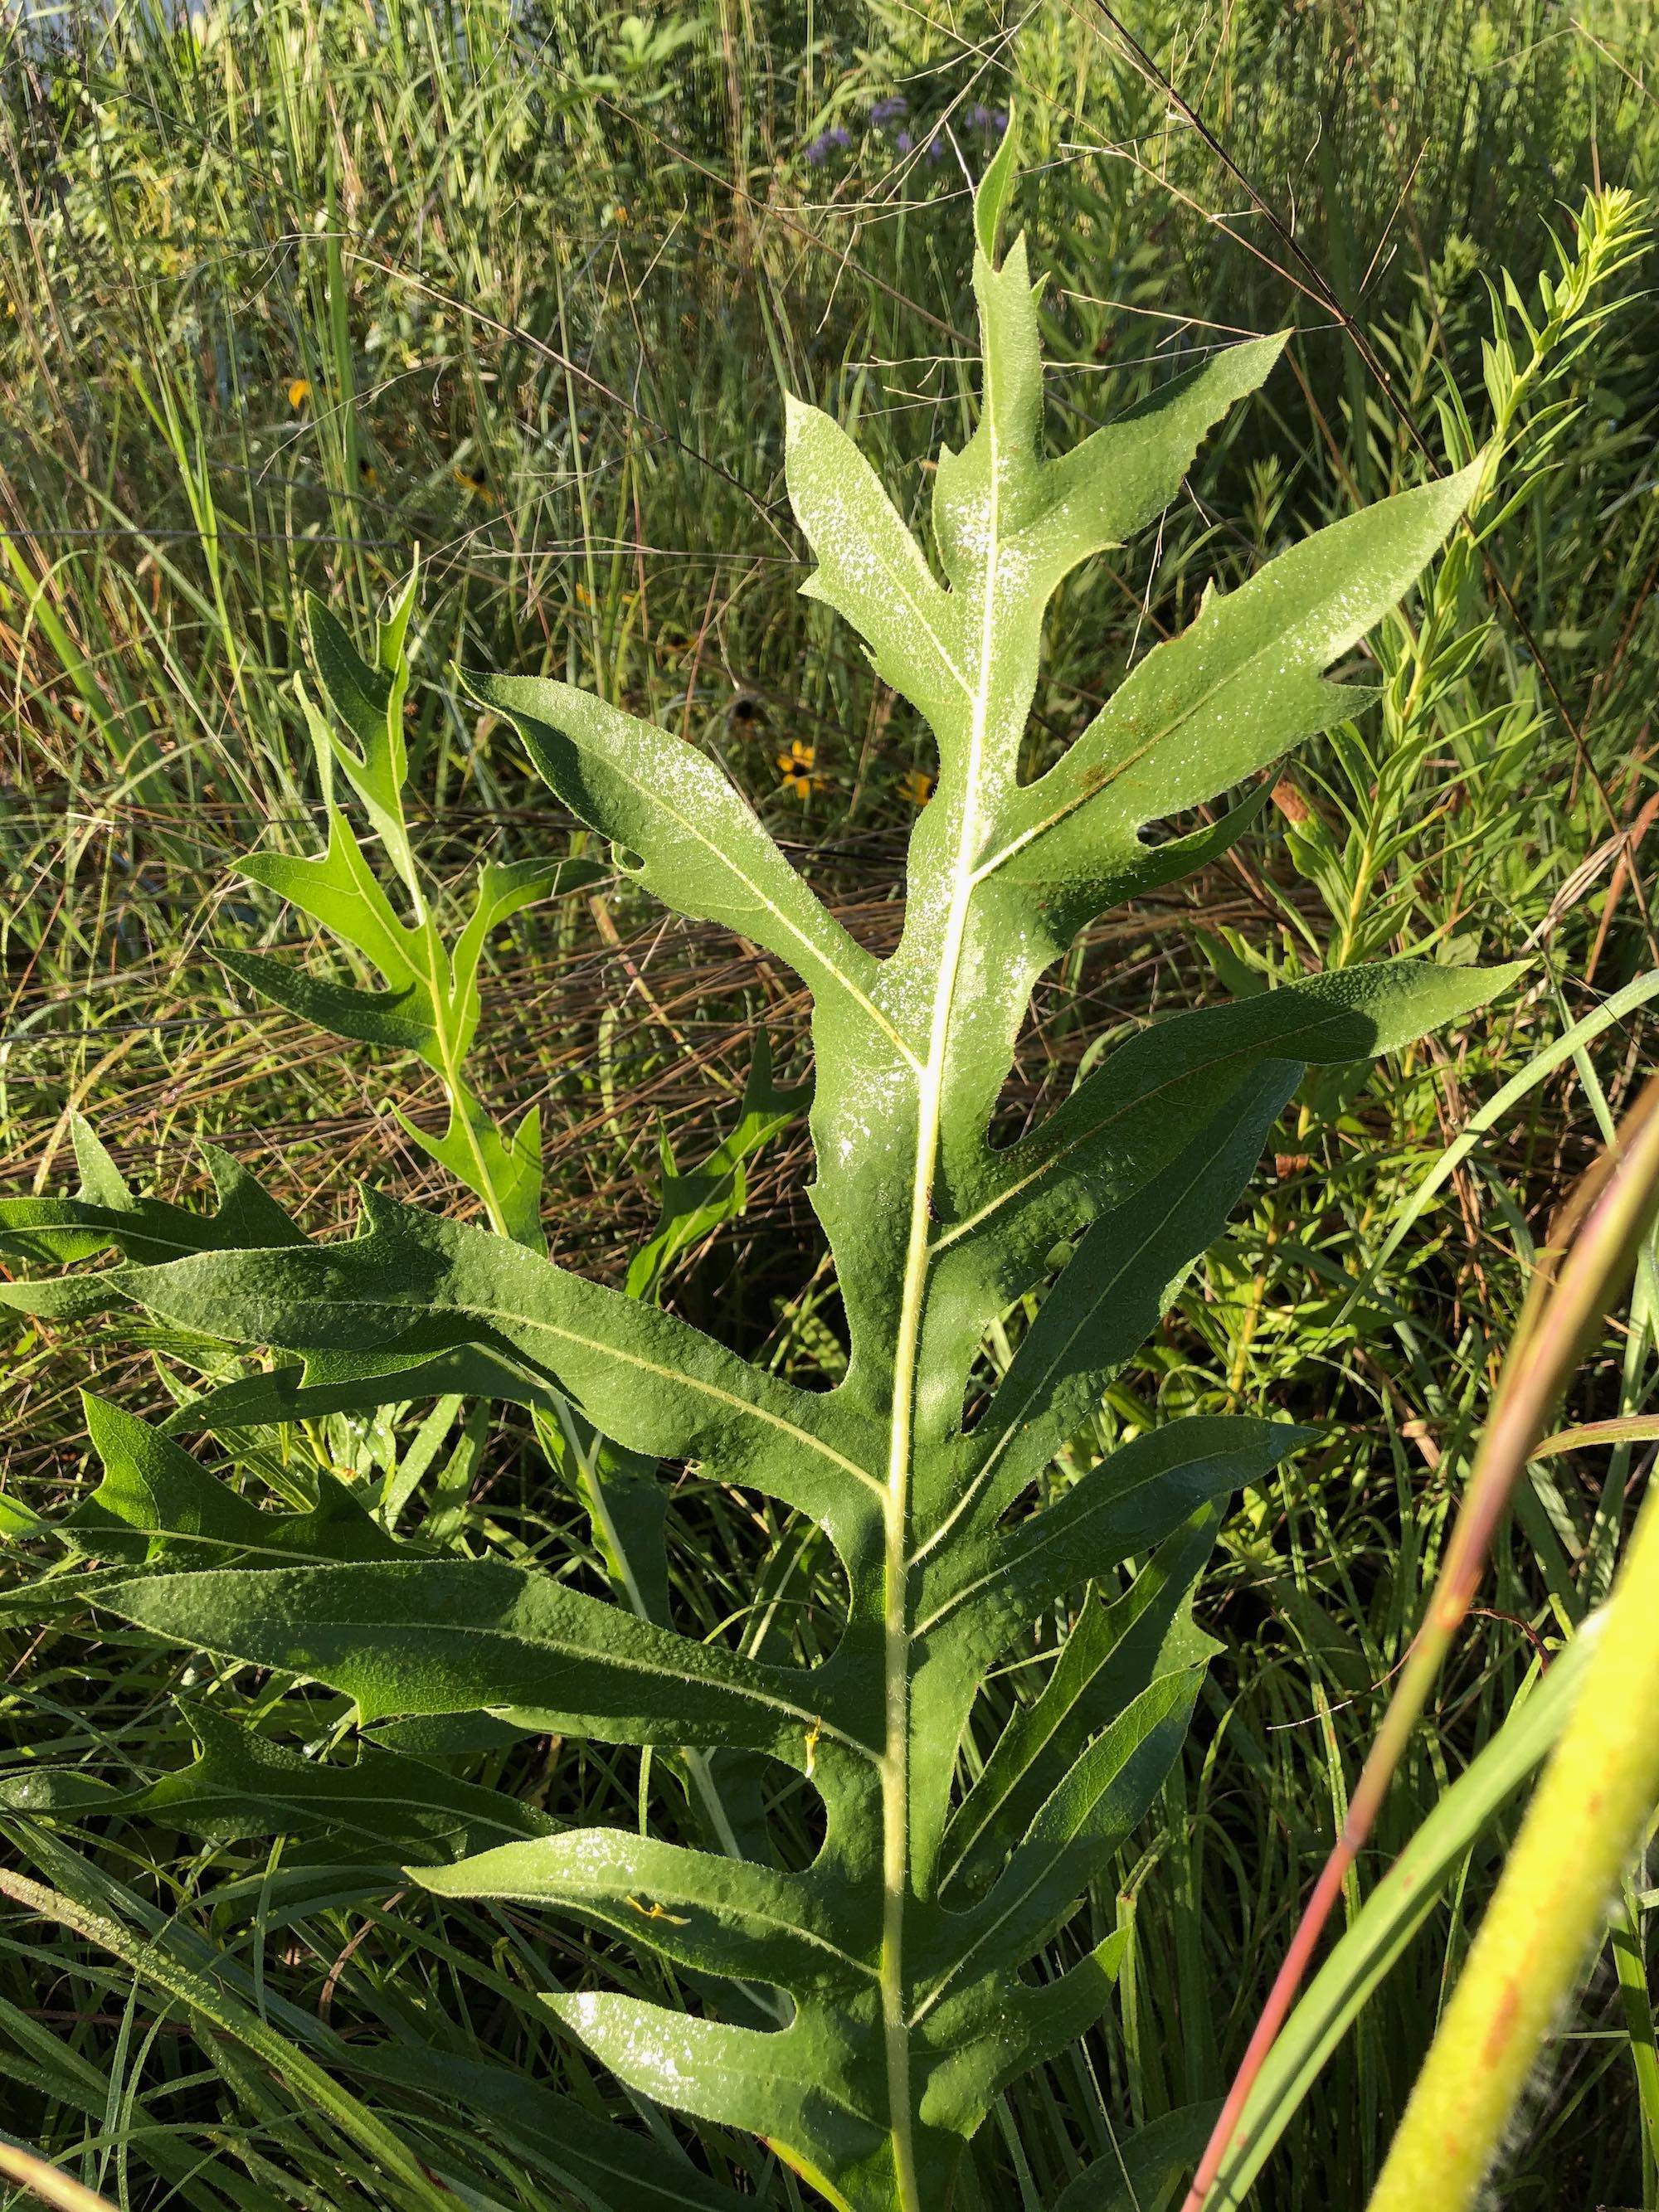 Compass Plant stem and leaves in the UW-Madison Arborteum in Madison, Wisconsin on July 31, 2020